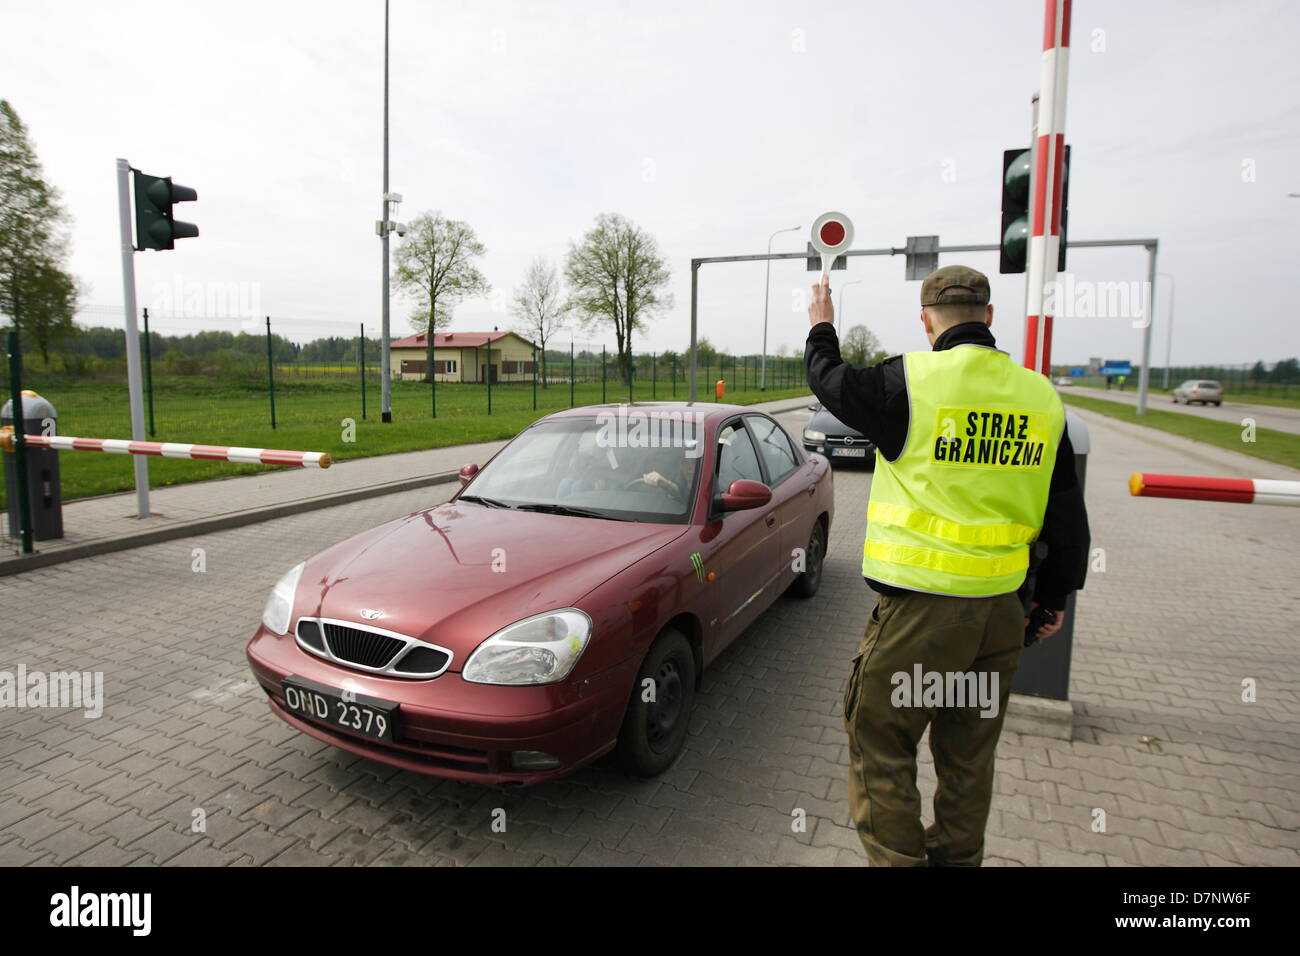 Grzechotki, Poland 11th, May 2013 Tens of drivers protest on the Polish - Russian border at Grzechotki - Moamonowo border crossing. Protesters blocked border crossing against high duty and excise for fuel imposed by the customs when they cross border more then 10 times a month. Smuggling cheap fuel from Russia in Volkswagen Passats (100 liters fuel tank) cars is very popular near Russian border. 1 liter of diesel in Russian costs less than 70 Euro cencts (30 rubles).Michal Fludra/Alamy Live News Stock Photo